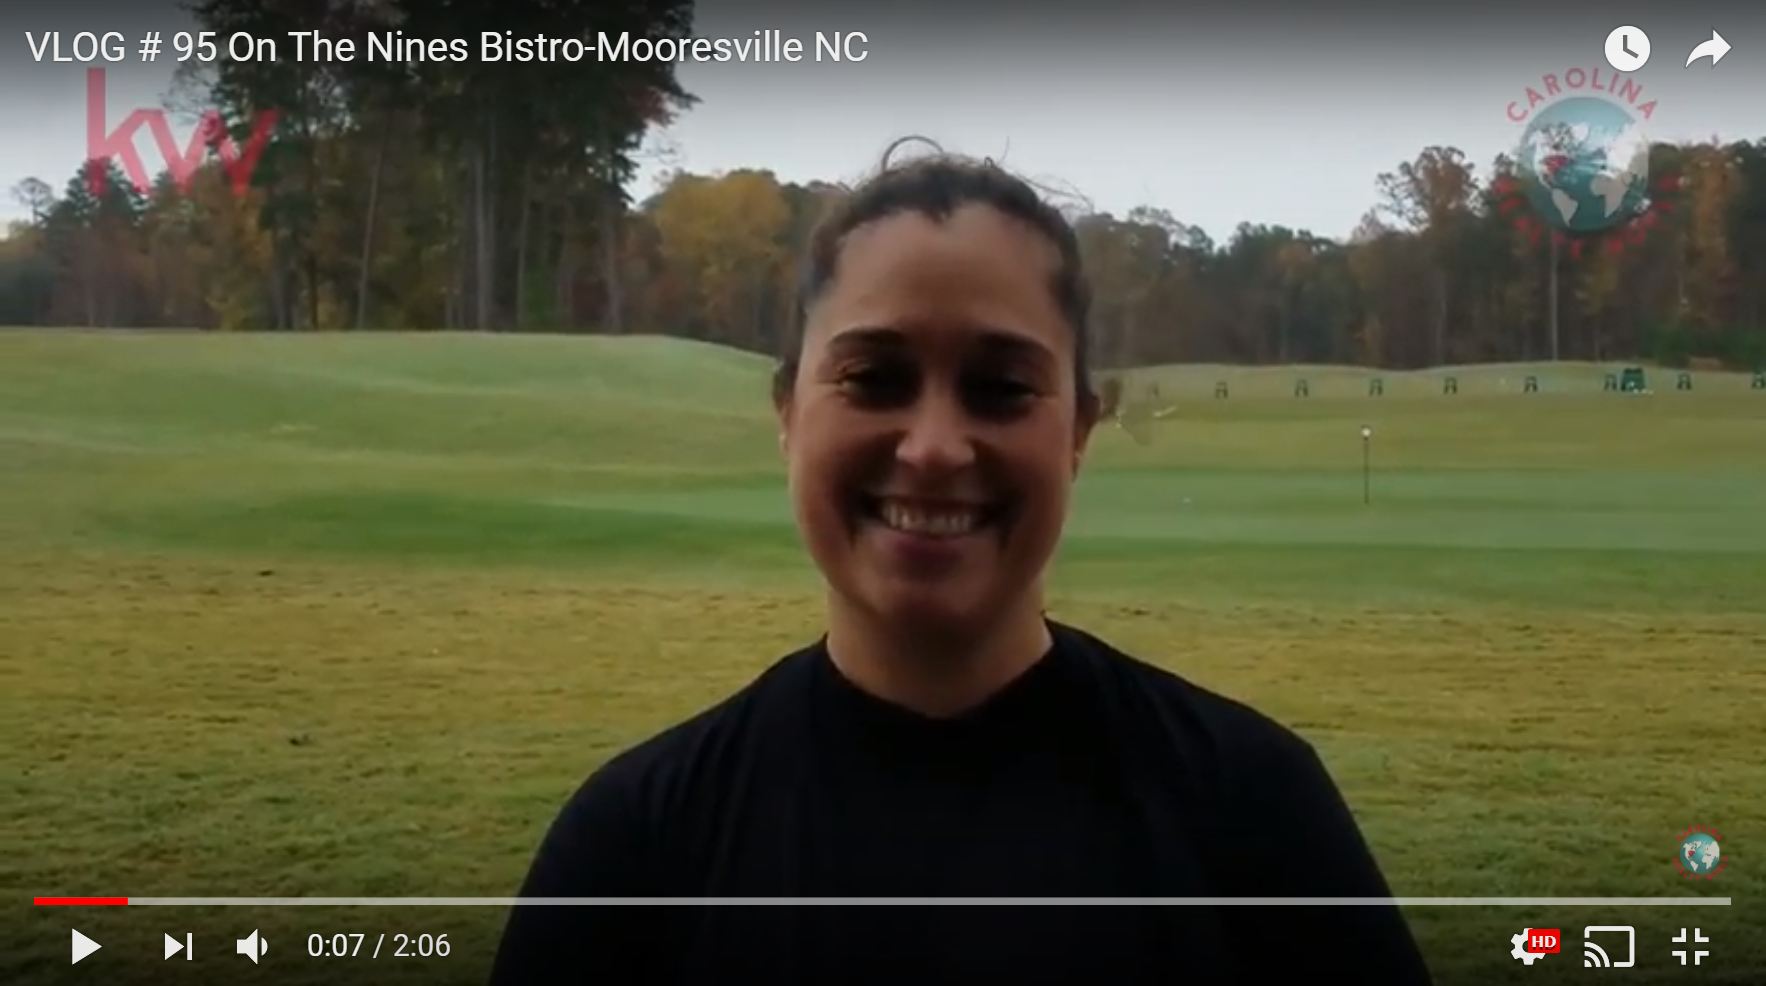 VLOG # 95 On The Nines Bistro-Mooresville NC